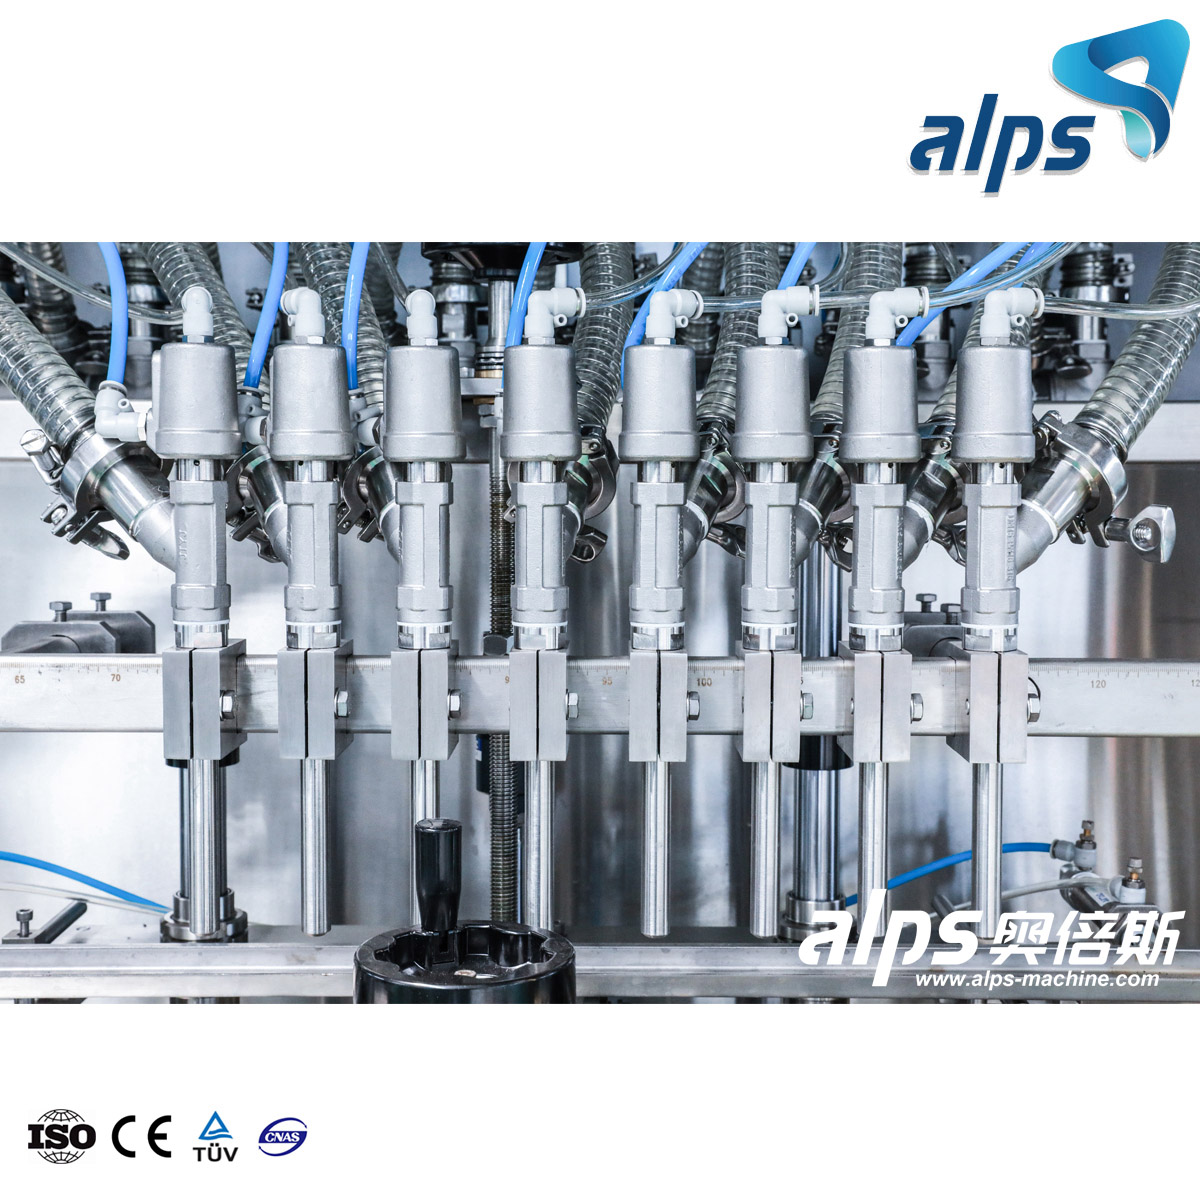 Automatic Linear Type Liquid Filling Machine for Shampoo And Detergent